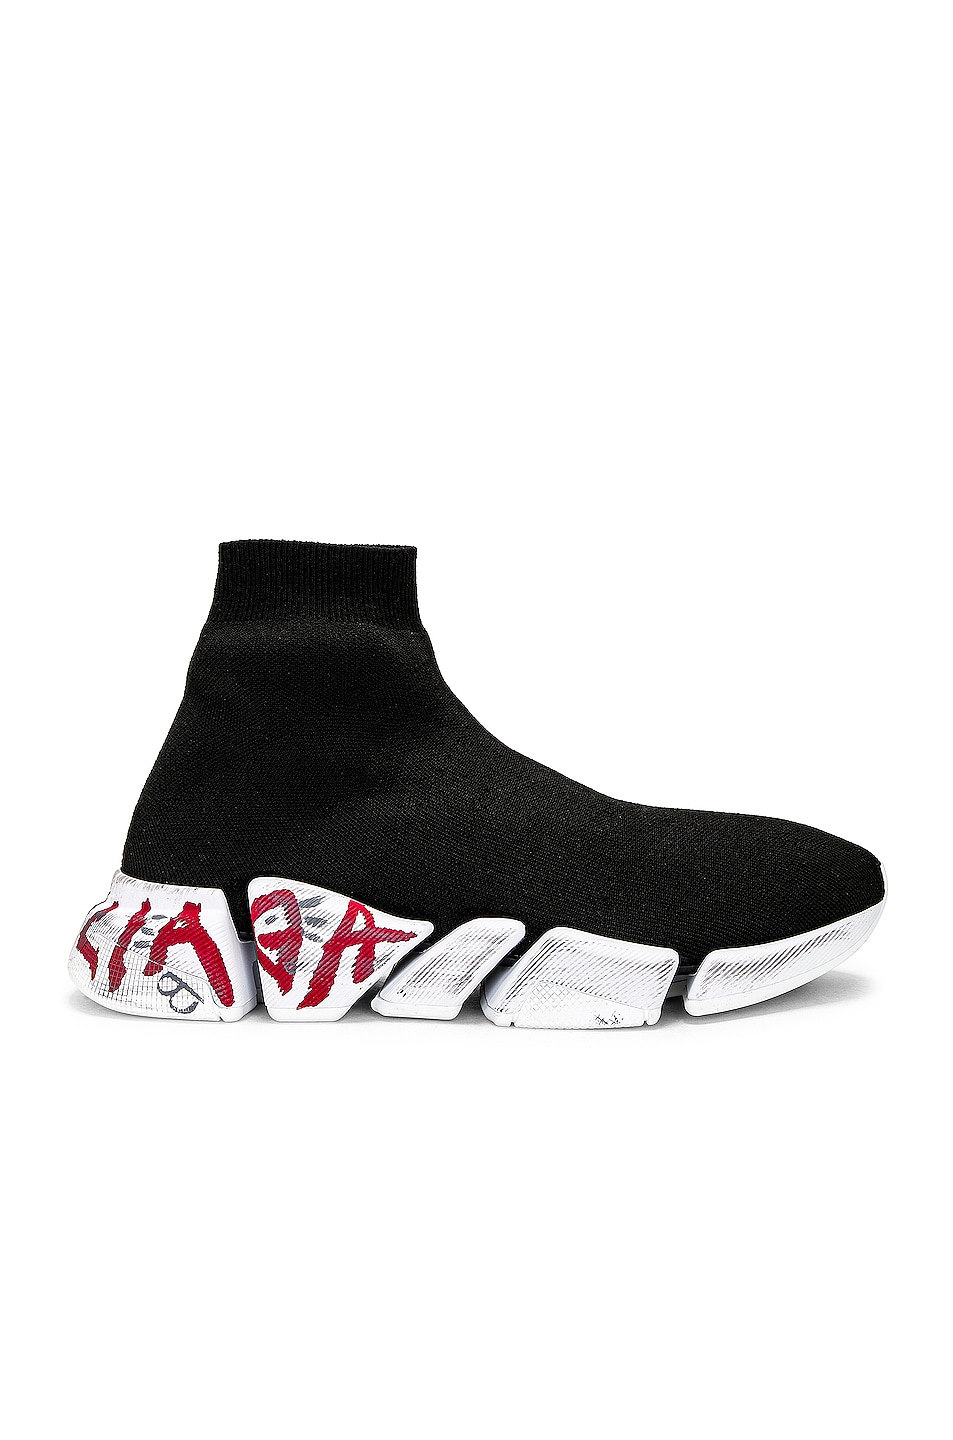 Image 1 of Balenciaga Speed 2.0 Lt Sneaker in Black, White & Red